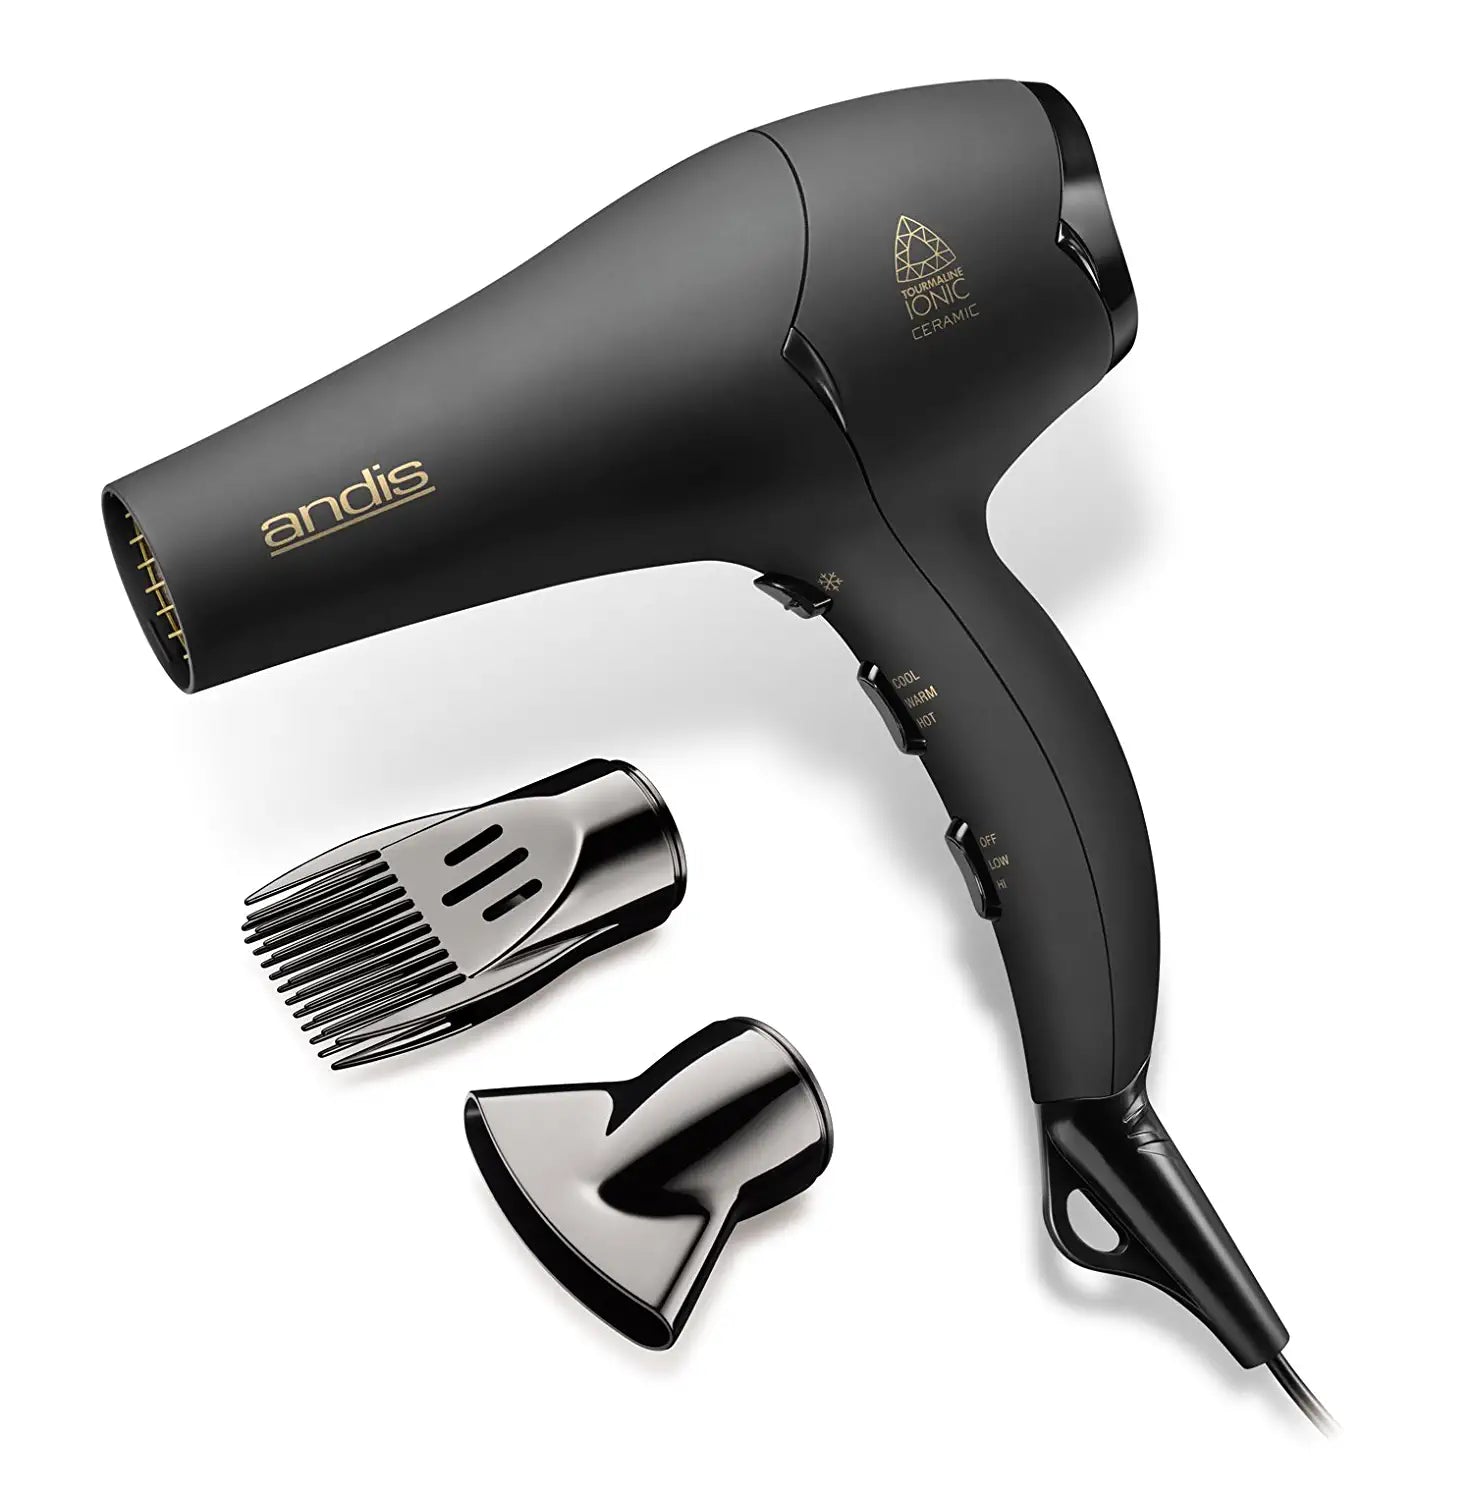 Andis 80480 1875-Watt Tourmaline Ceramic Ionic Salon Hair Dryer with Diffuser, Fast Dry Low Noise Blow Dryer, Travel Hairdryer for Normal &amp; Curly Hair, Soft Grip, Black